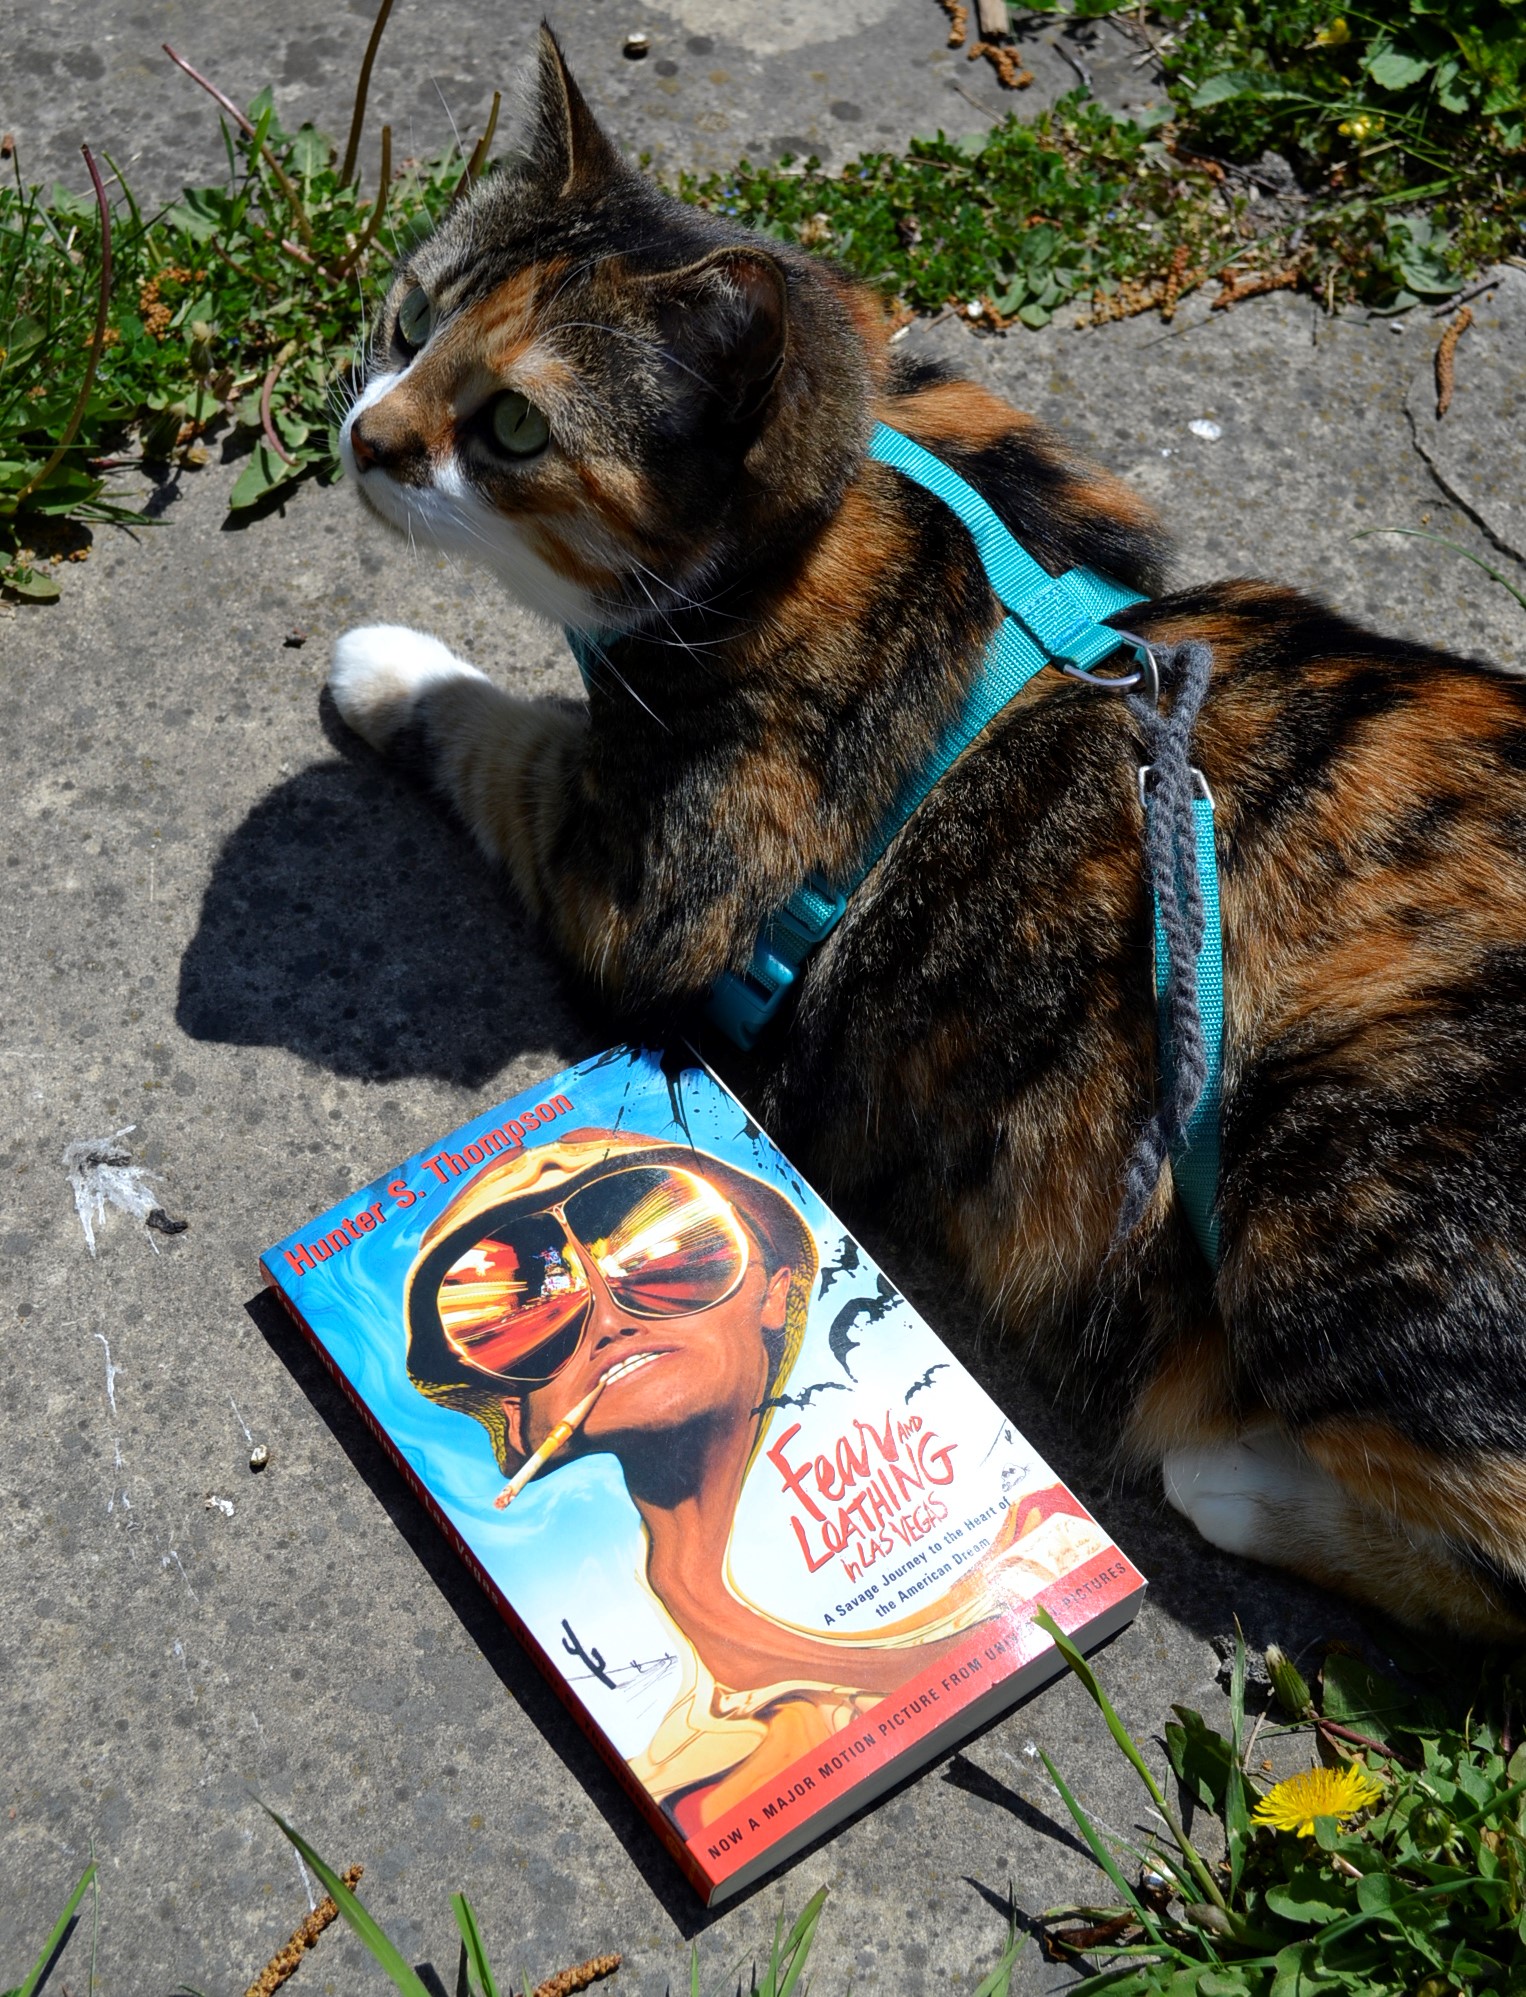 A calico tabby sits beside Fear and Loathing in Las Vegas.